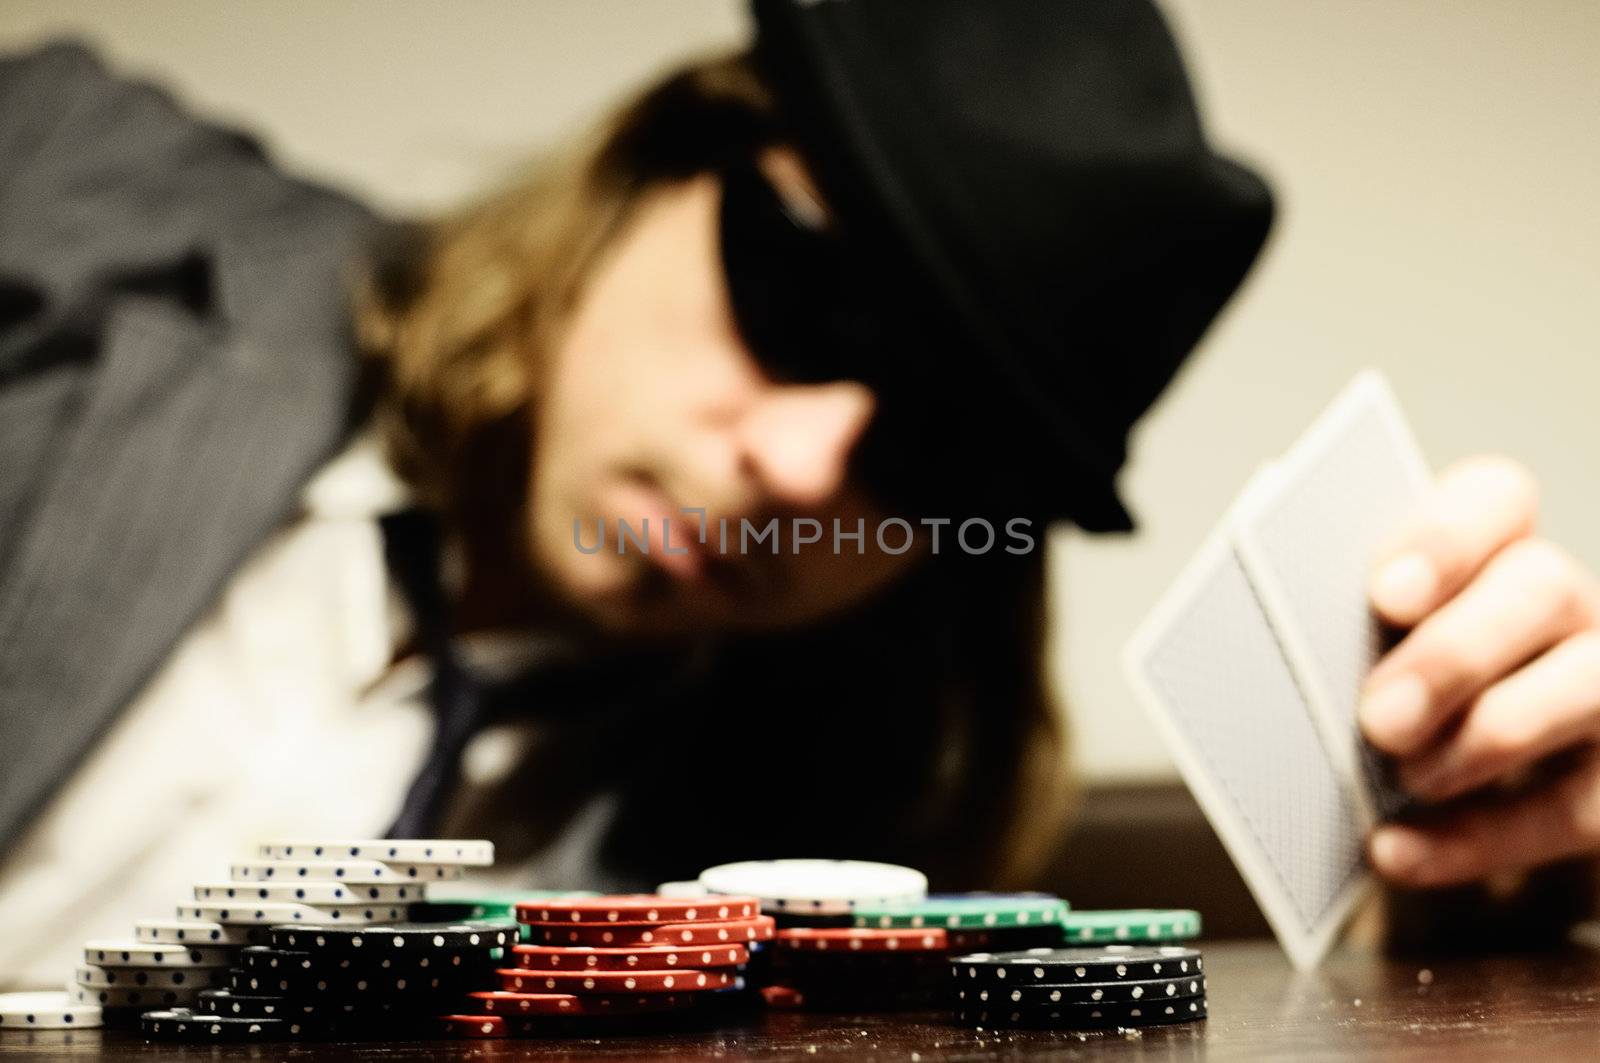 Man with hat and glasses playing underground poker.